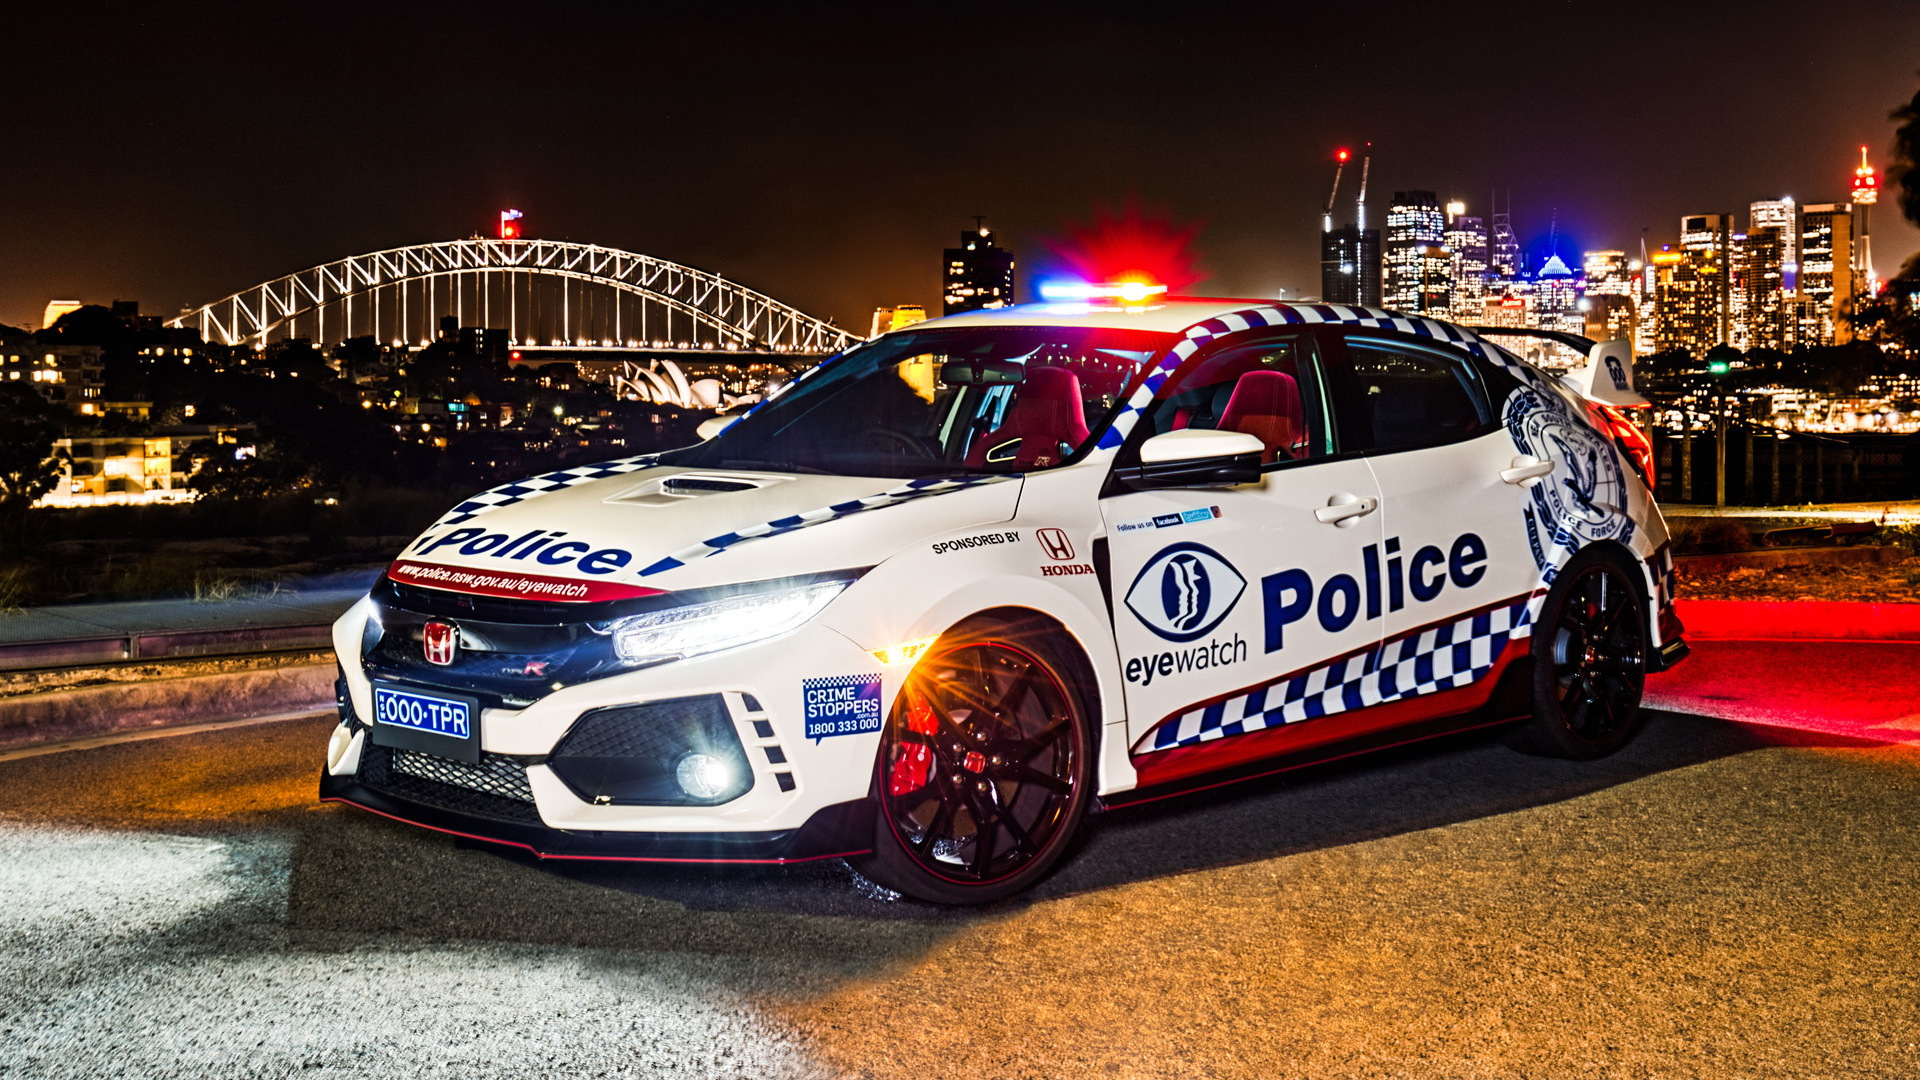 Honda Civic Type R police car for New South Wales, Australia